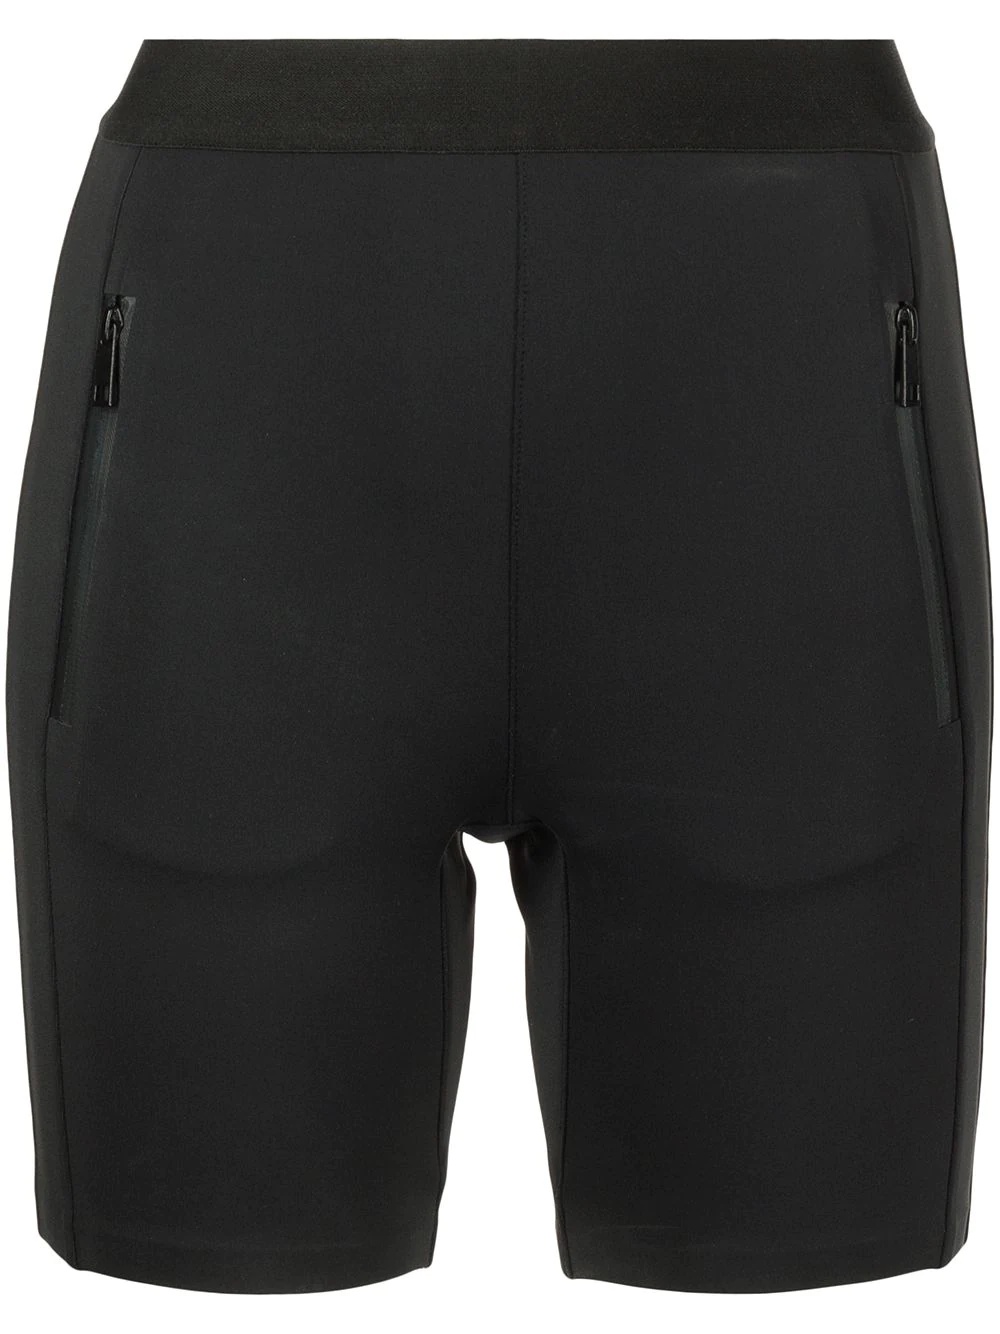 Everyday cycling shorts - 1